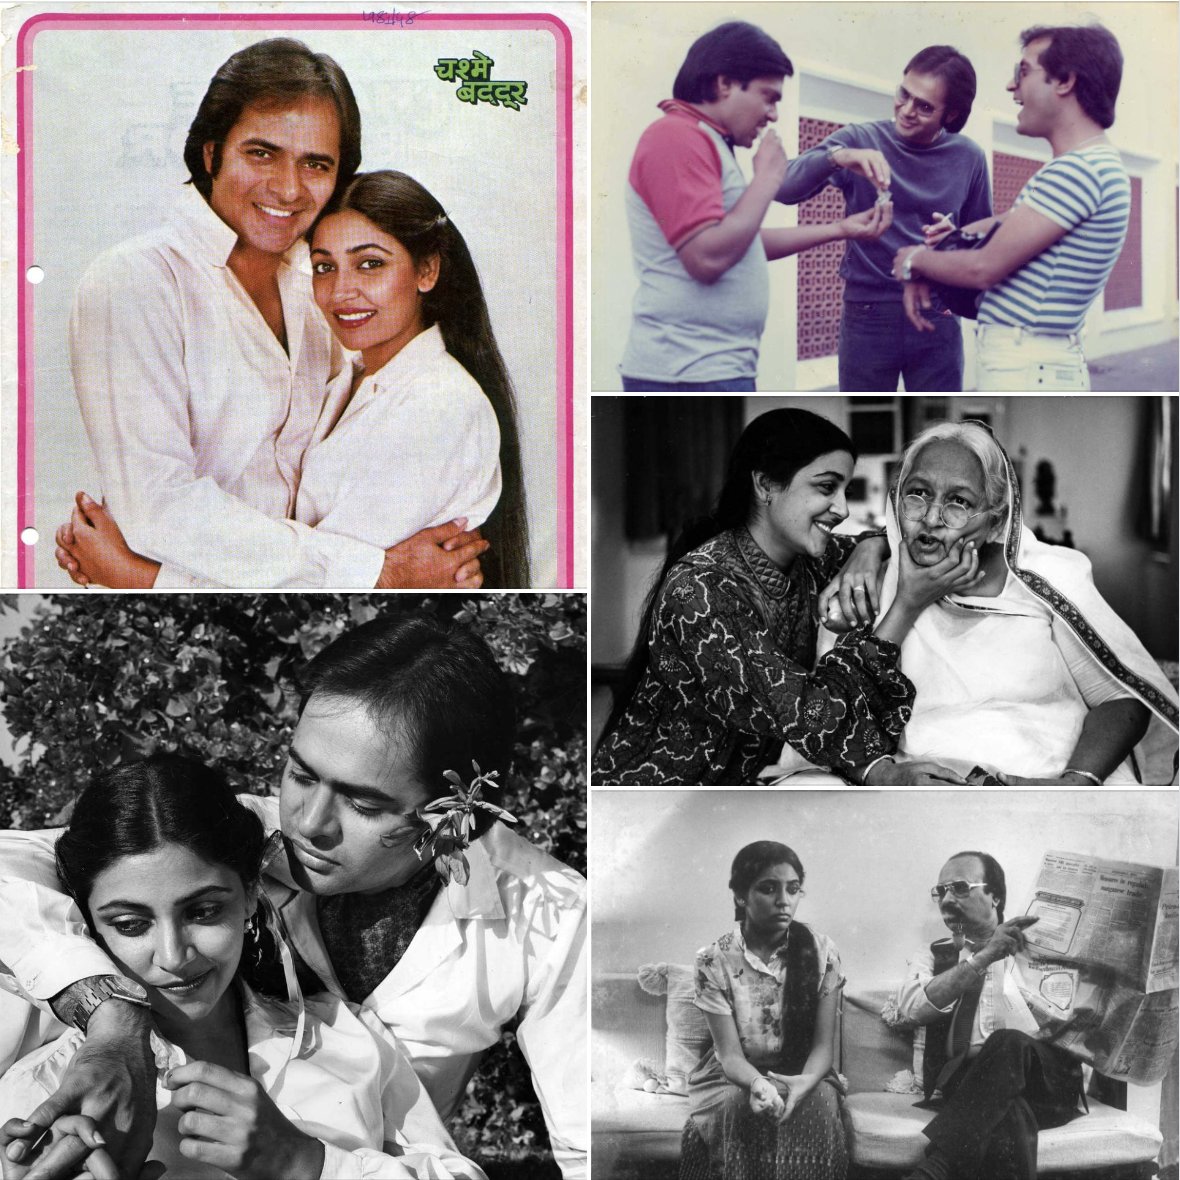 43 Years of #ChashmeBuddoor (08/05/1981) It is a romantic comedy-buddy film starring Farooq Shaikh, Deepti Naval, Rakesh Bedi, Ravi Baswani and Saeed Jaffrey. The film is directed by Sai Paranjpye and produced by Gul Anand and his sister Jayshree Anand — Makhija. The film is…